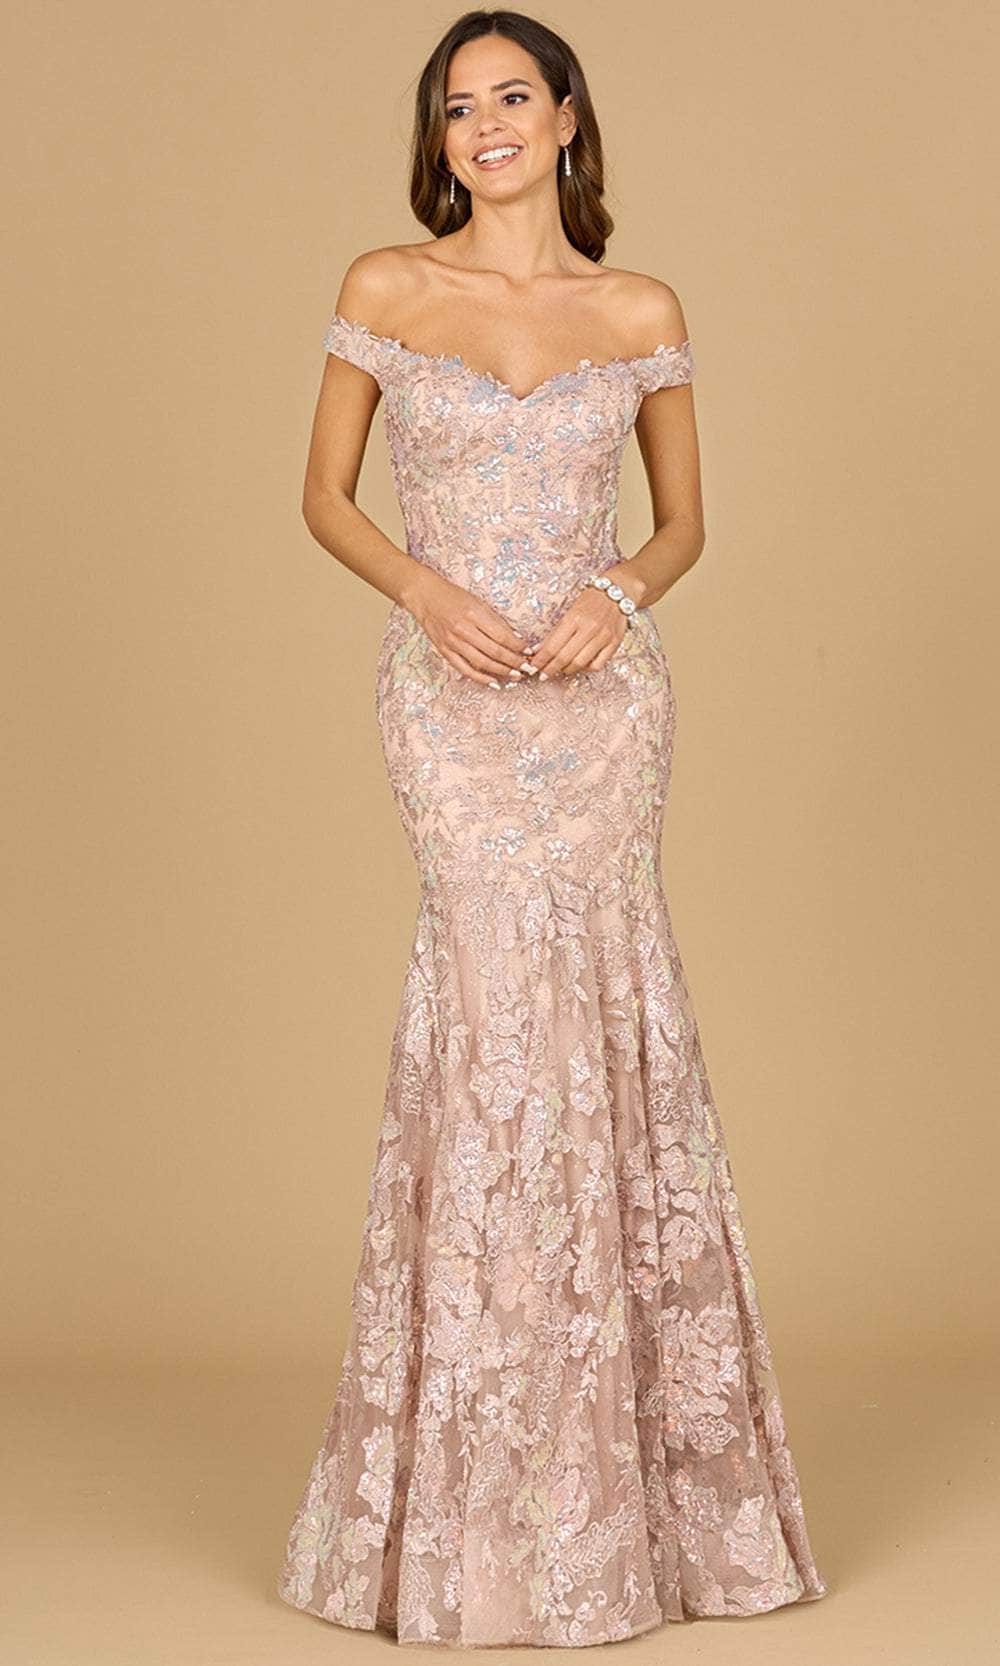 Lara Dresses 29136 - Floral Lace Mermaid Evening Gown
